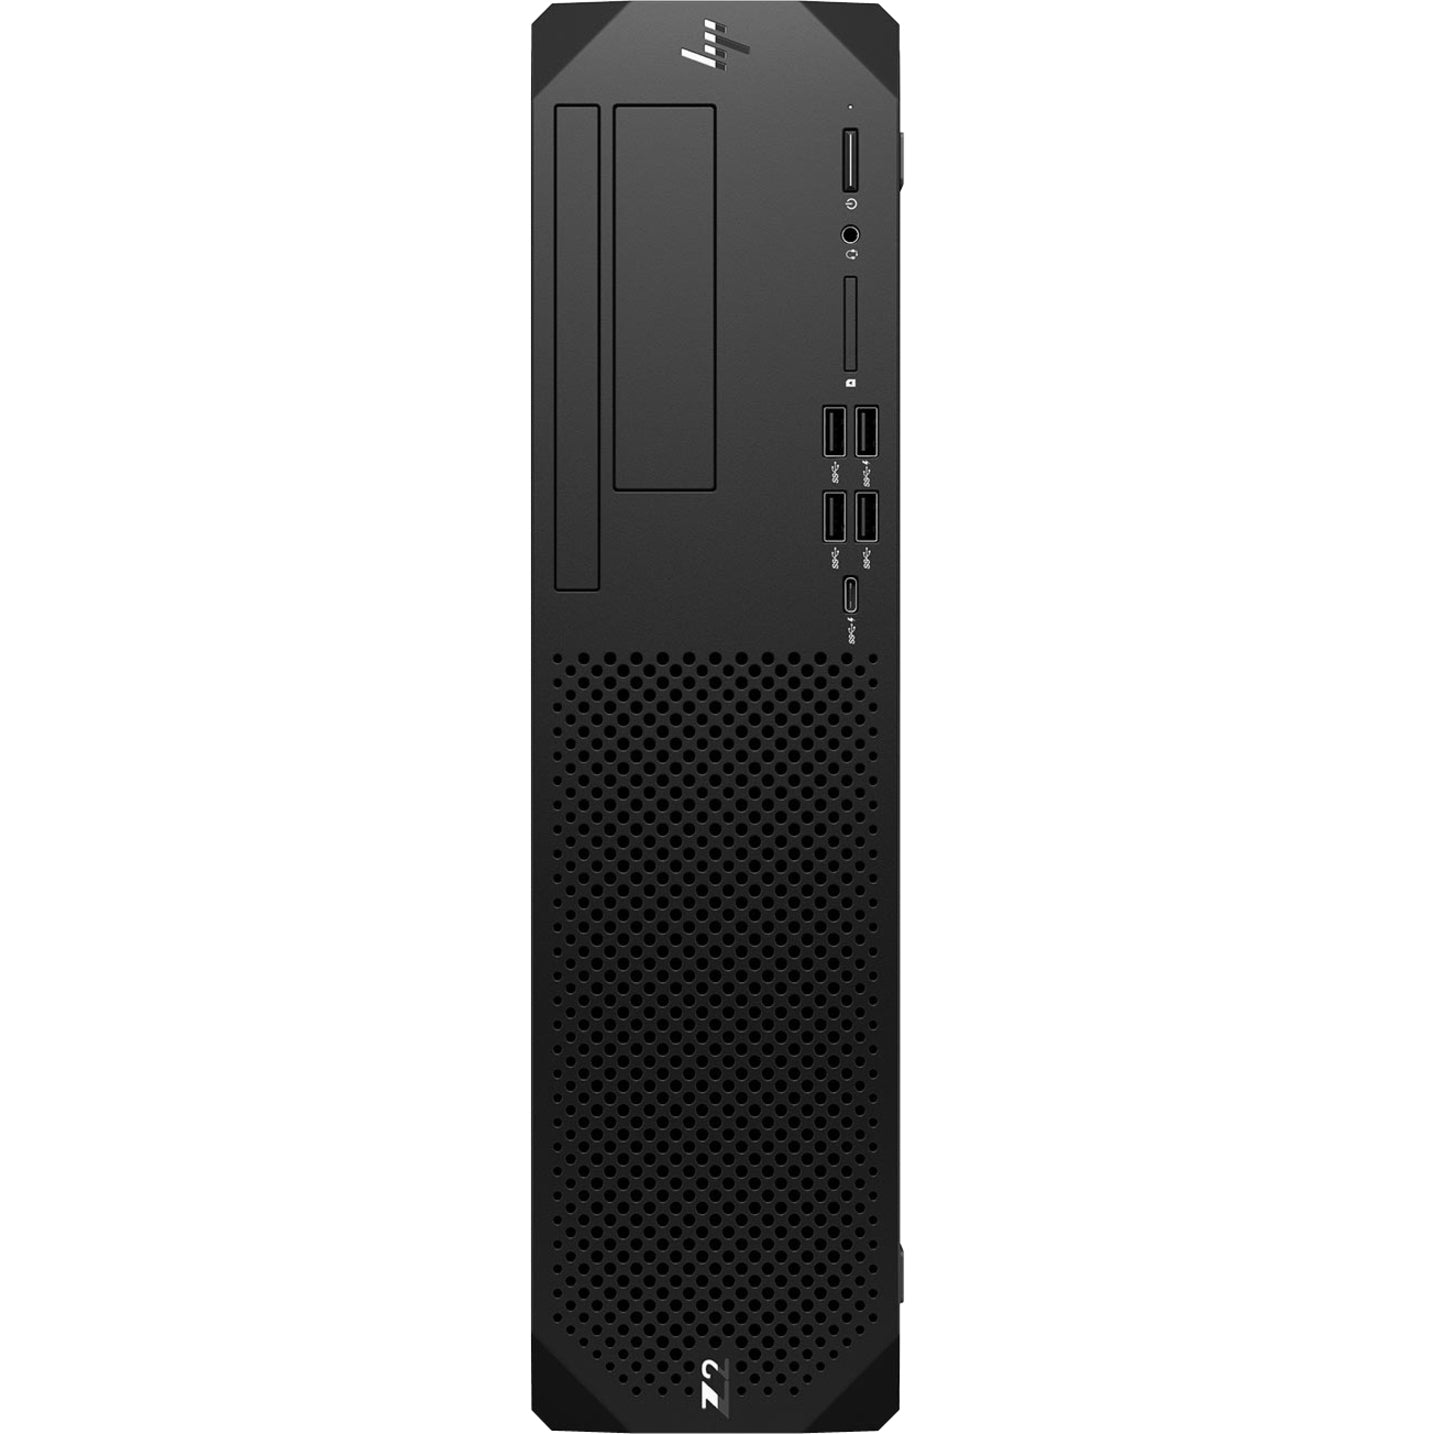 HP Z2 G9 Workstation - Intel Core i7 Dodeca-core - 32GB RAM - 512GB SSD - Small Form Factor [Discontinued]